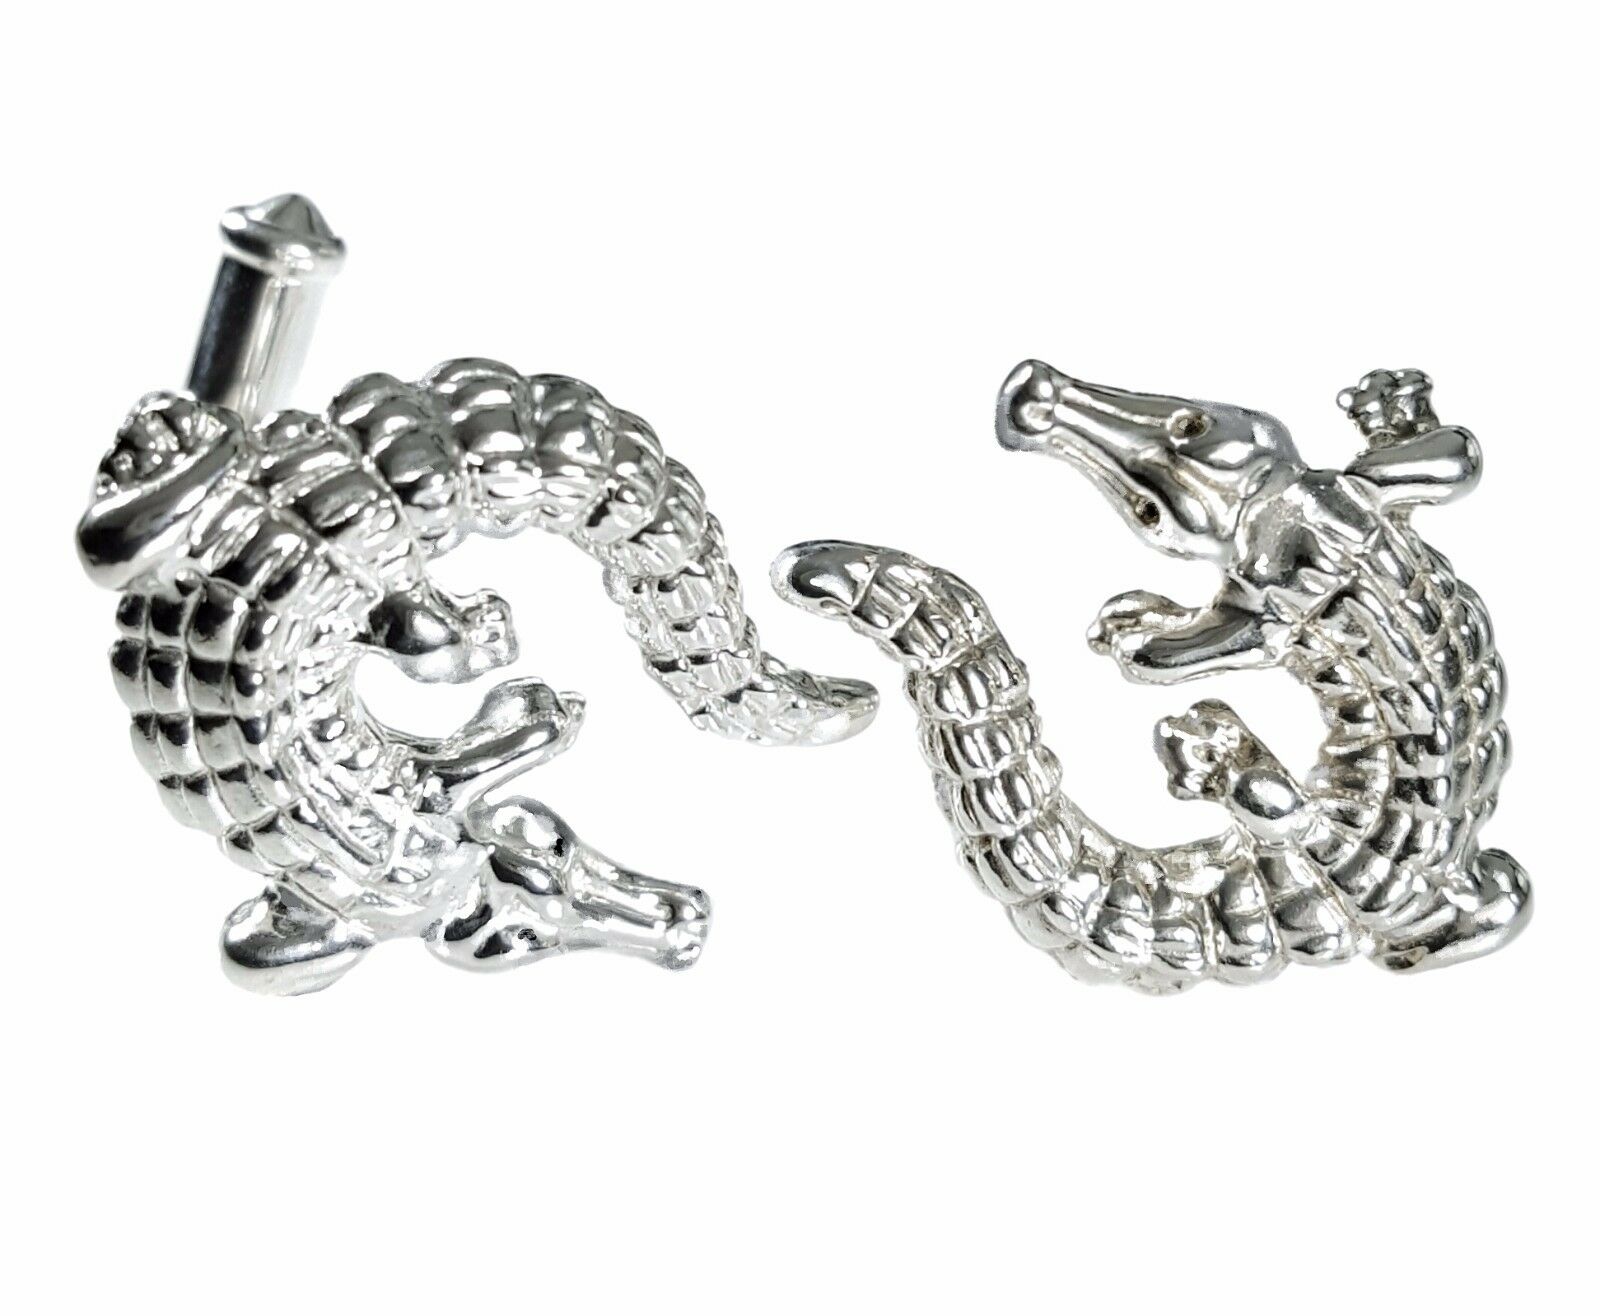 A pair of very beautiful sterling silver alligator cufflinks